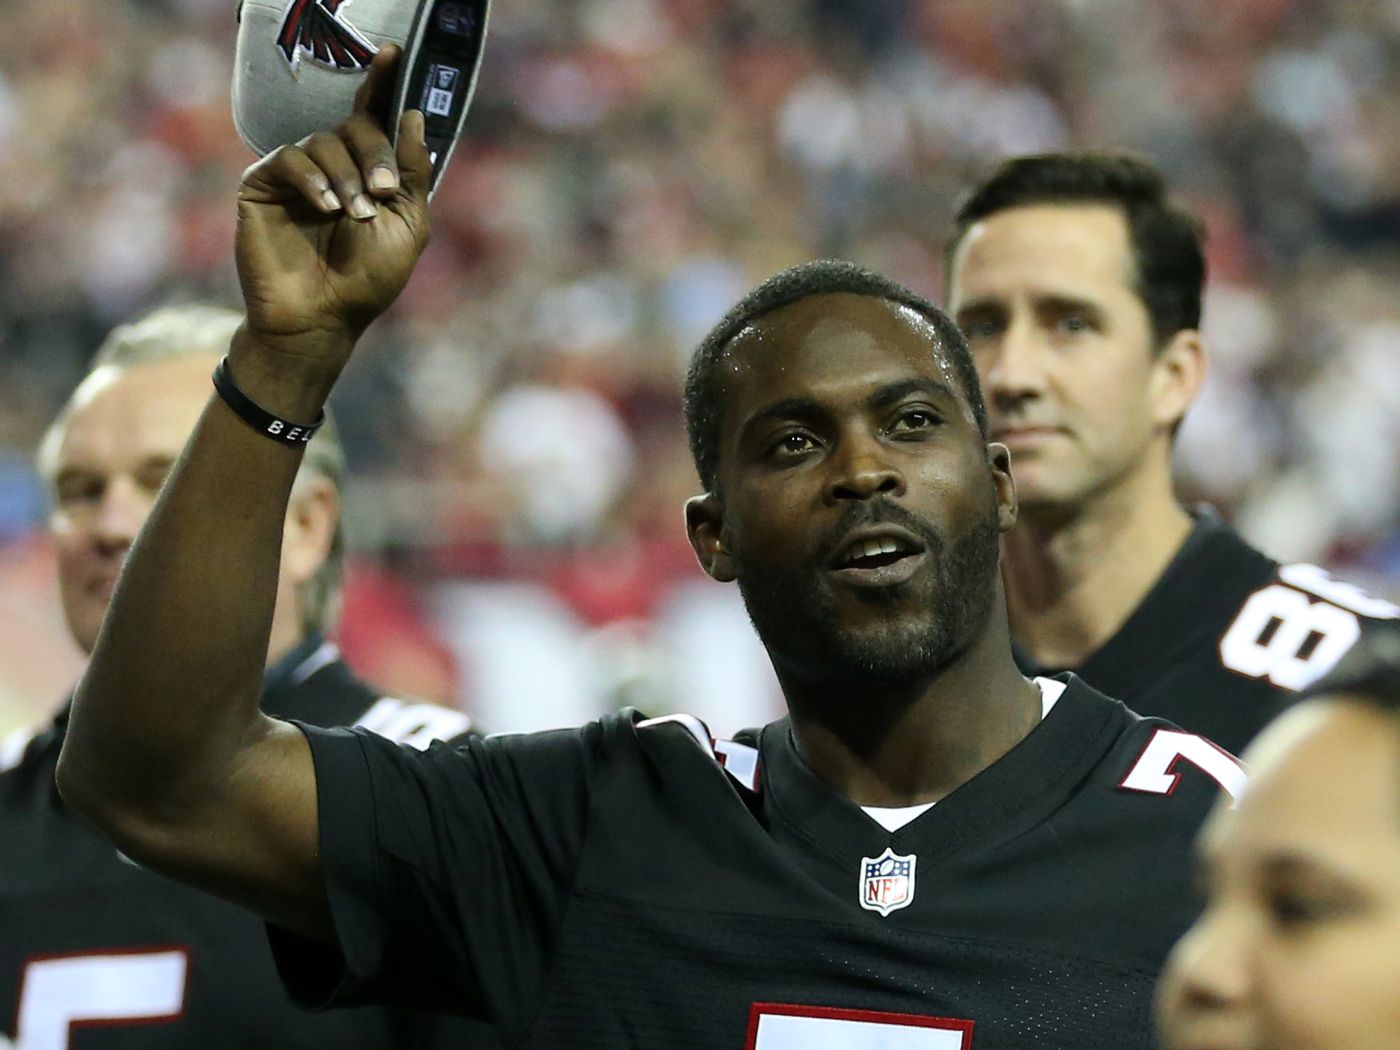 Michael Vick has officially unretired! He will play for the FCF League